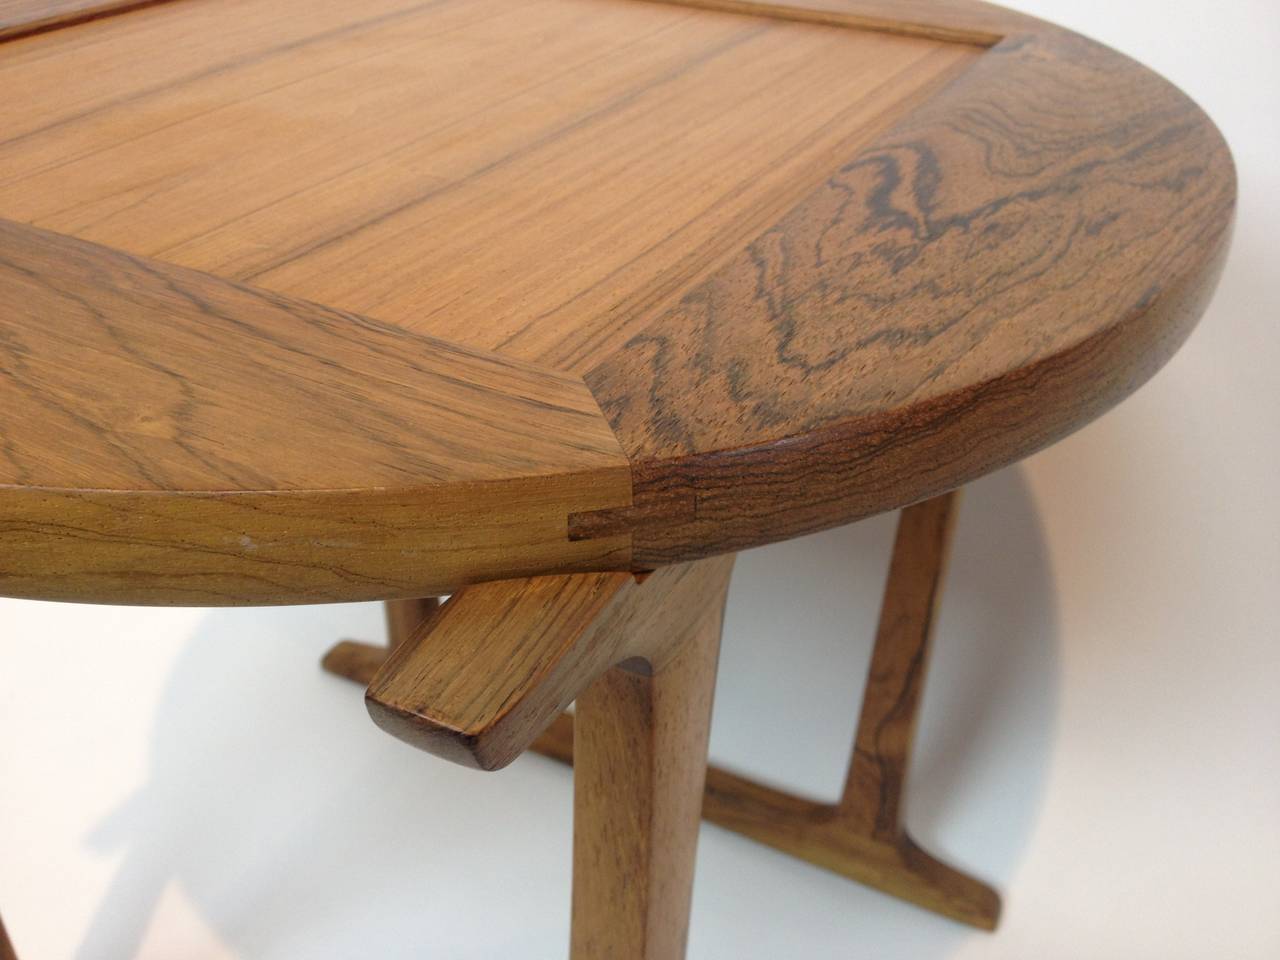 Mid-20th Century Jens Quistgaard Danish Modern Rosewood Tile Flip-Top End Table For Sale